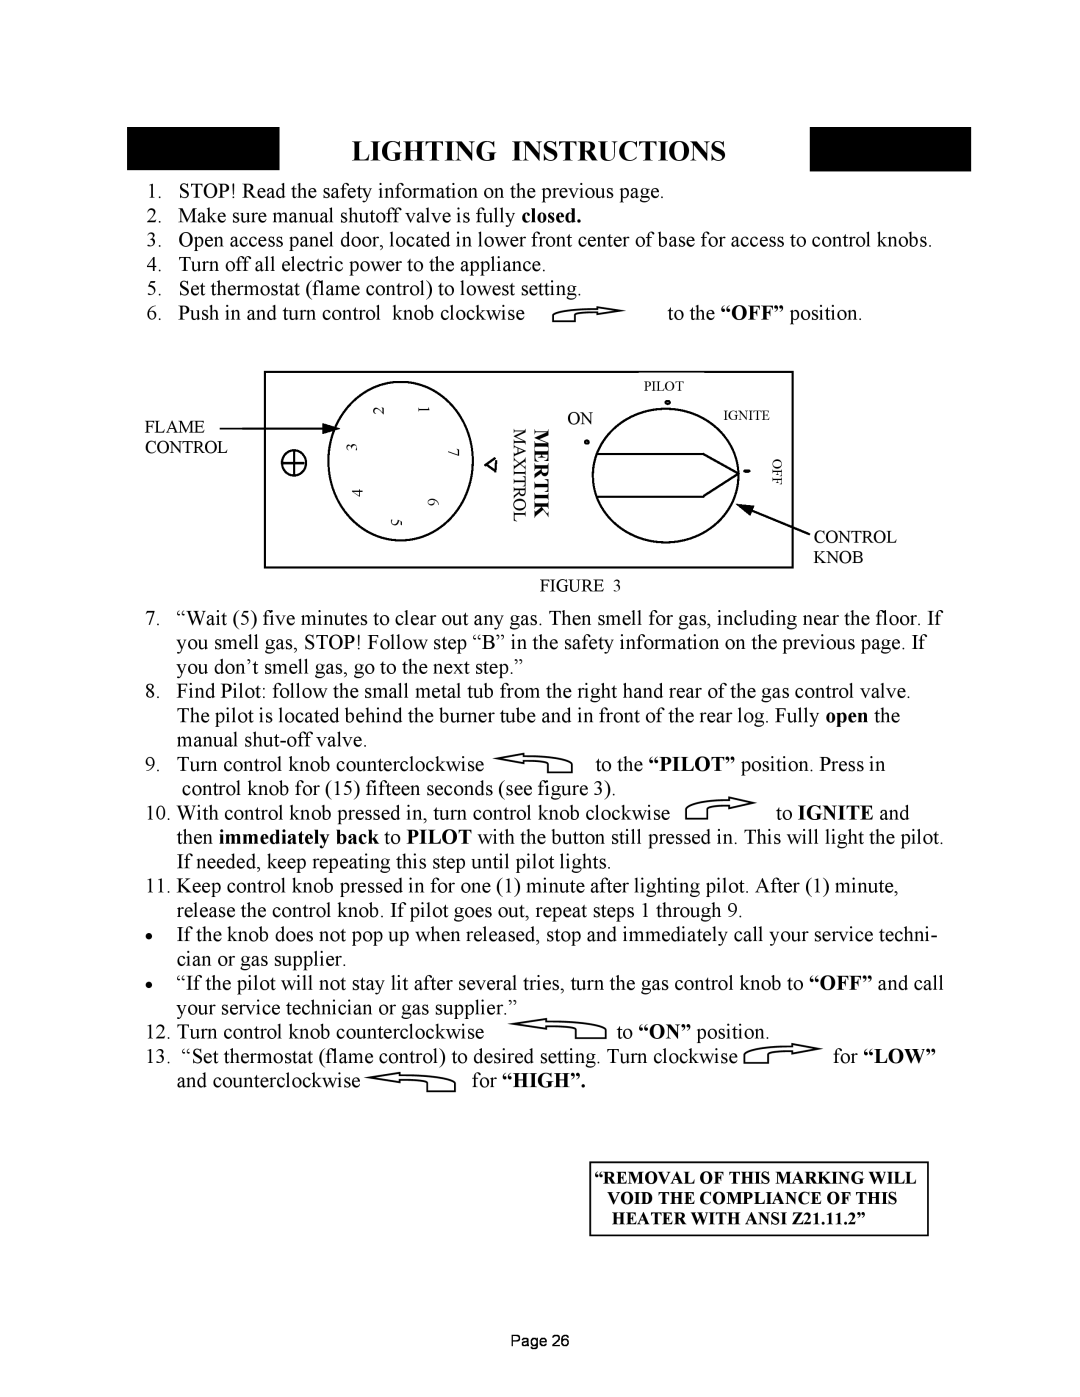 New Buck Corporation MODEL FP-327-ZC manual Lighting Instructions, to IGNITE and, for “LOW”, for “HIGH” 